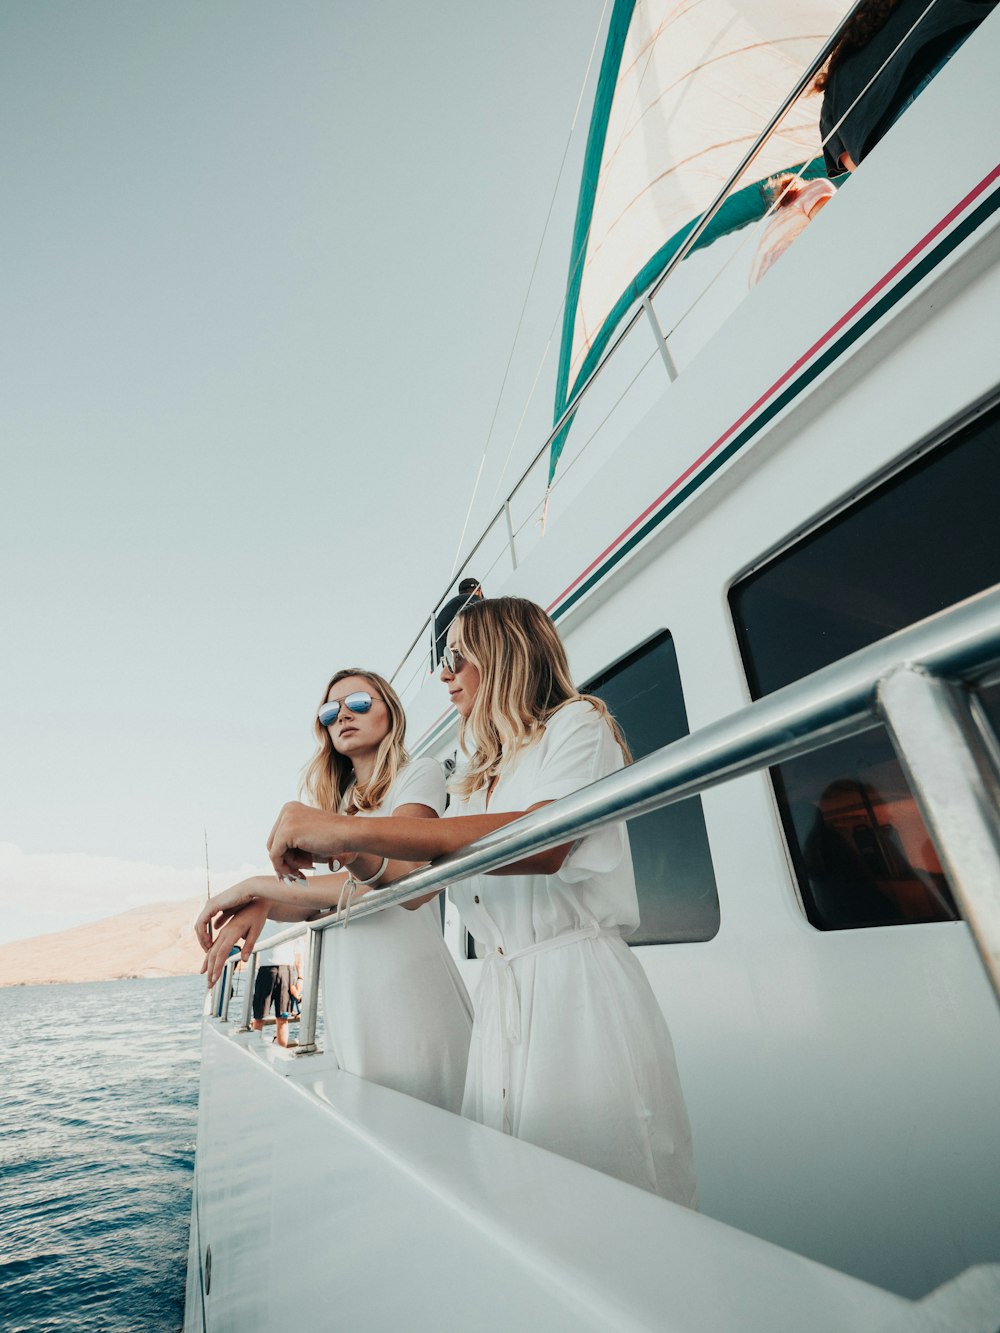 two women standing on yacht during daytime